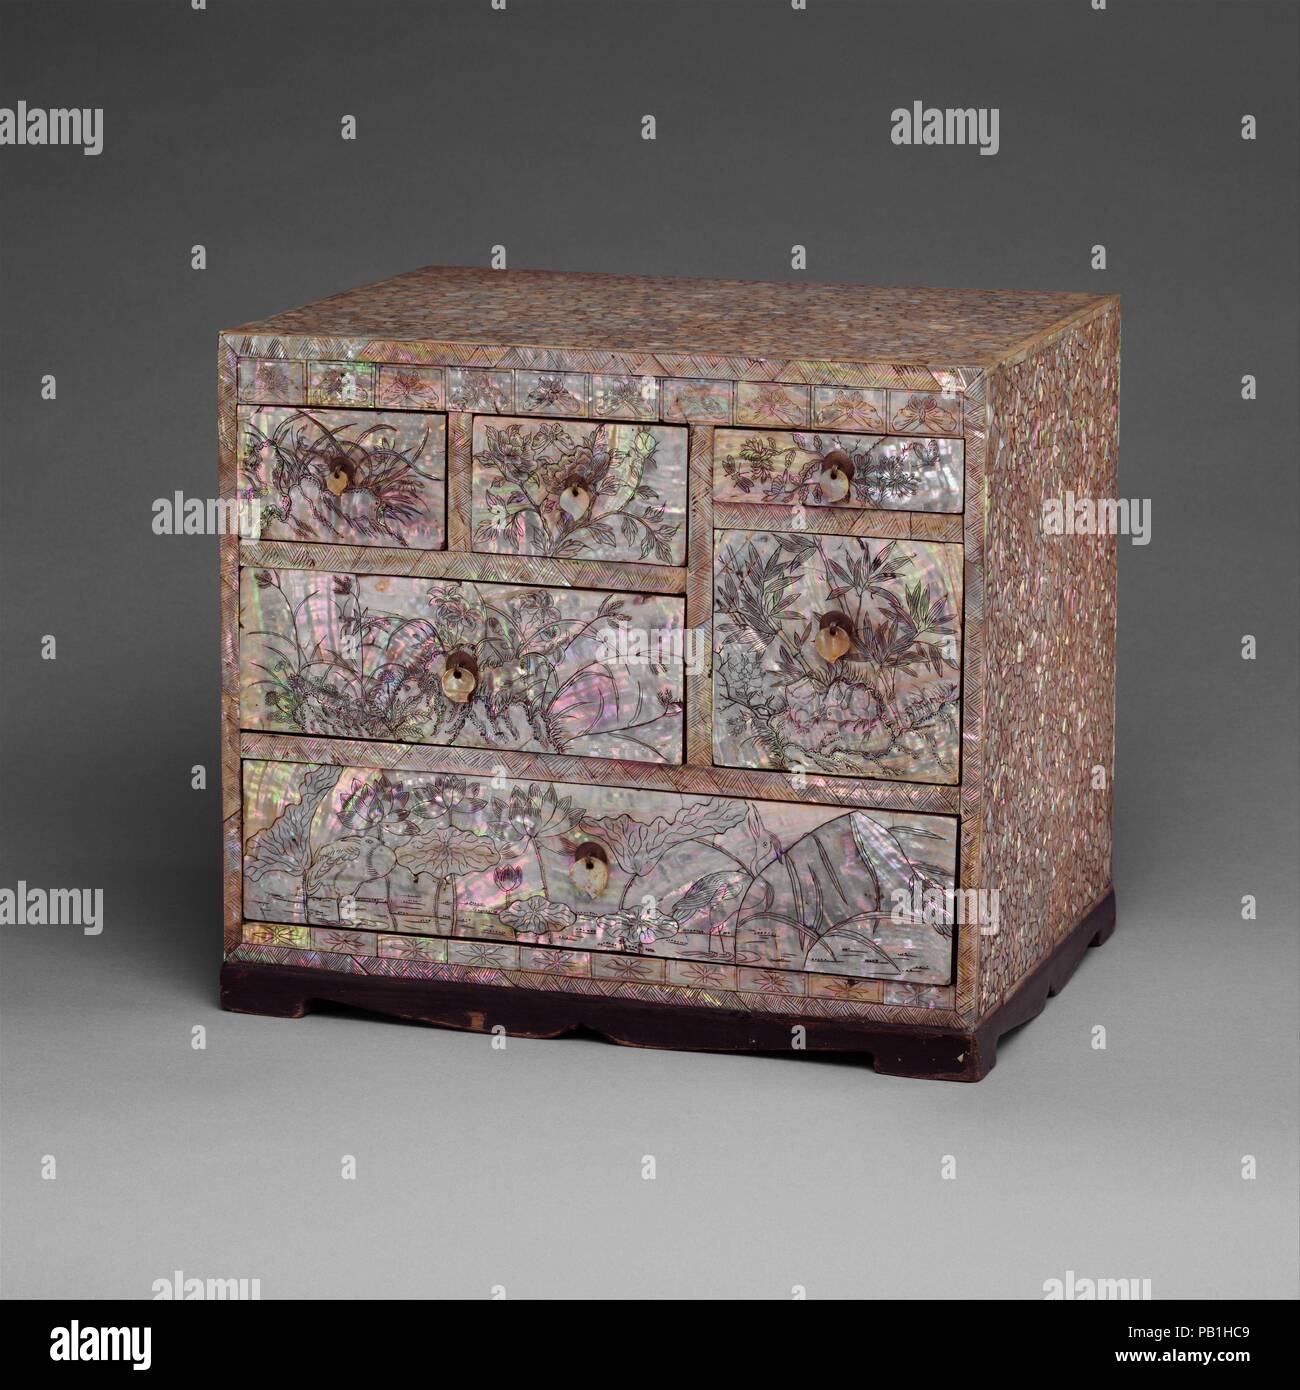 Small Chest of Drawers with Decoration of Flowers, Birds, and Insects. Culture: Korea. Dimensions: H. 11 3/8 in. (28.9 cm); W. 12 7/8 in. (32.7 cm); D. 9 7/8 in. (25.1 cm). Date: early 20th century.  This chest is an excellent example of an early twentieth-century lacquer box with allover mother-of-pearl decoration. The incised floral motifs filled with black ink or charcoal make the piece particularly striking. The shape, size, and compartments suggest that this chest held writing or cosmetic paraphernalia. Museum: Metropolitan Museum of Art, New York, USA. Stock Photo